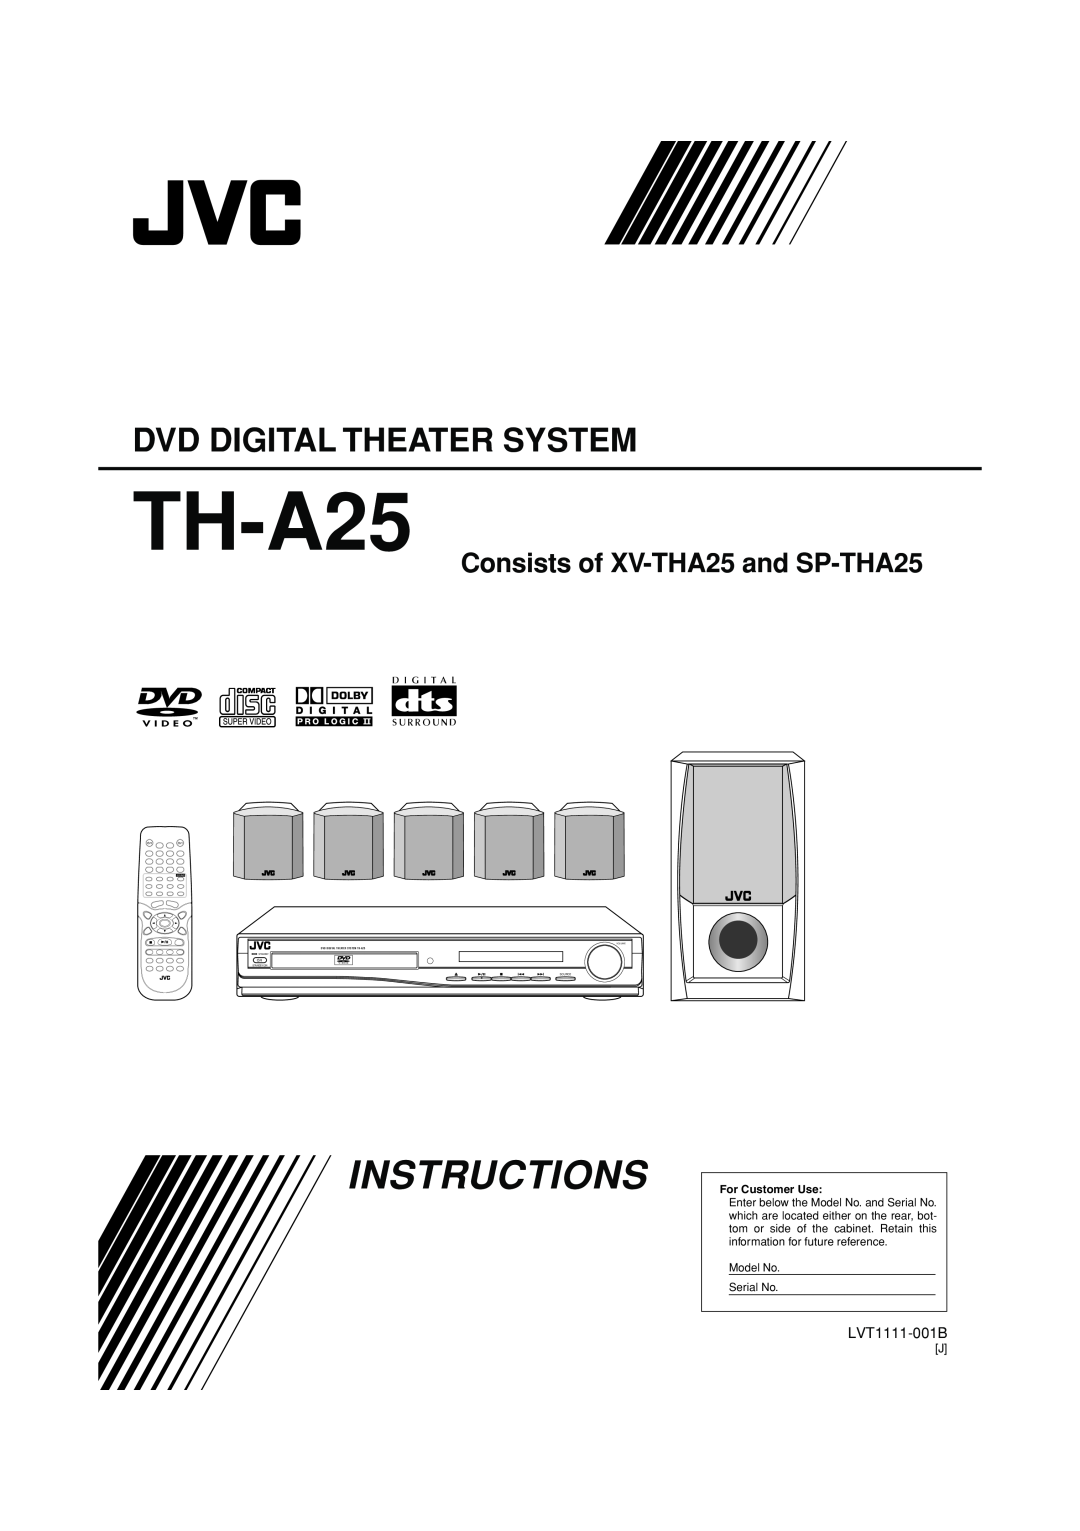 JVC TH-A25 manual Instructions, Dvd Digital Theater System, Consists of XV-THA25and SP-THA25, LVT1111-001B, Source, Sound 